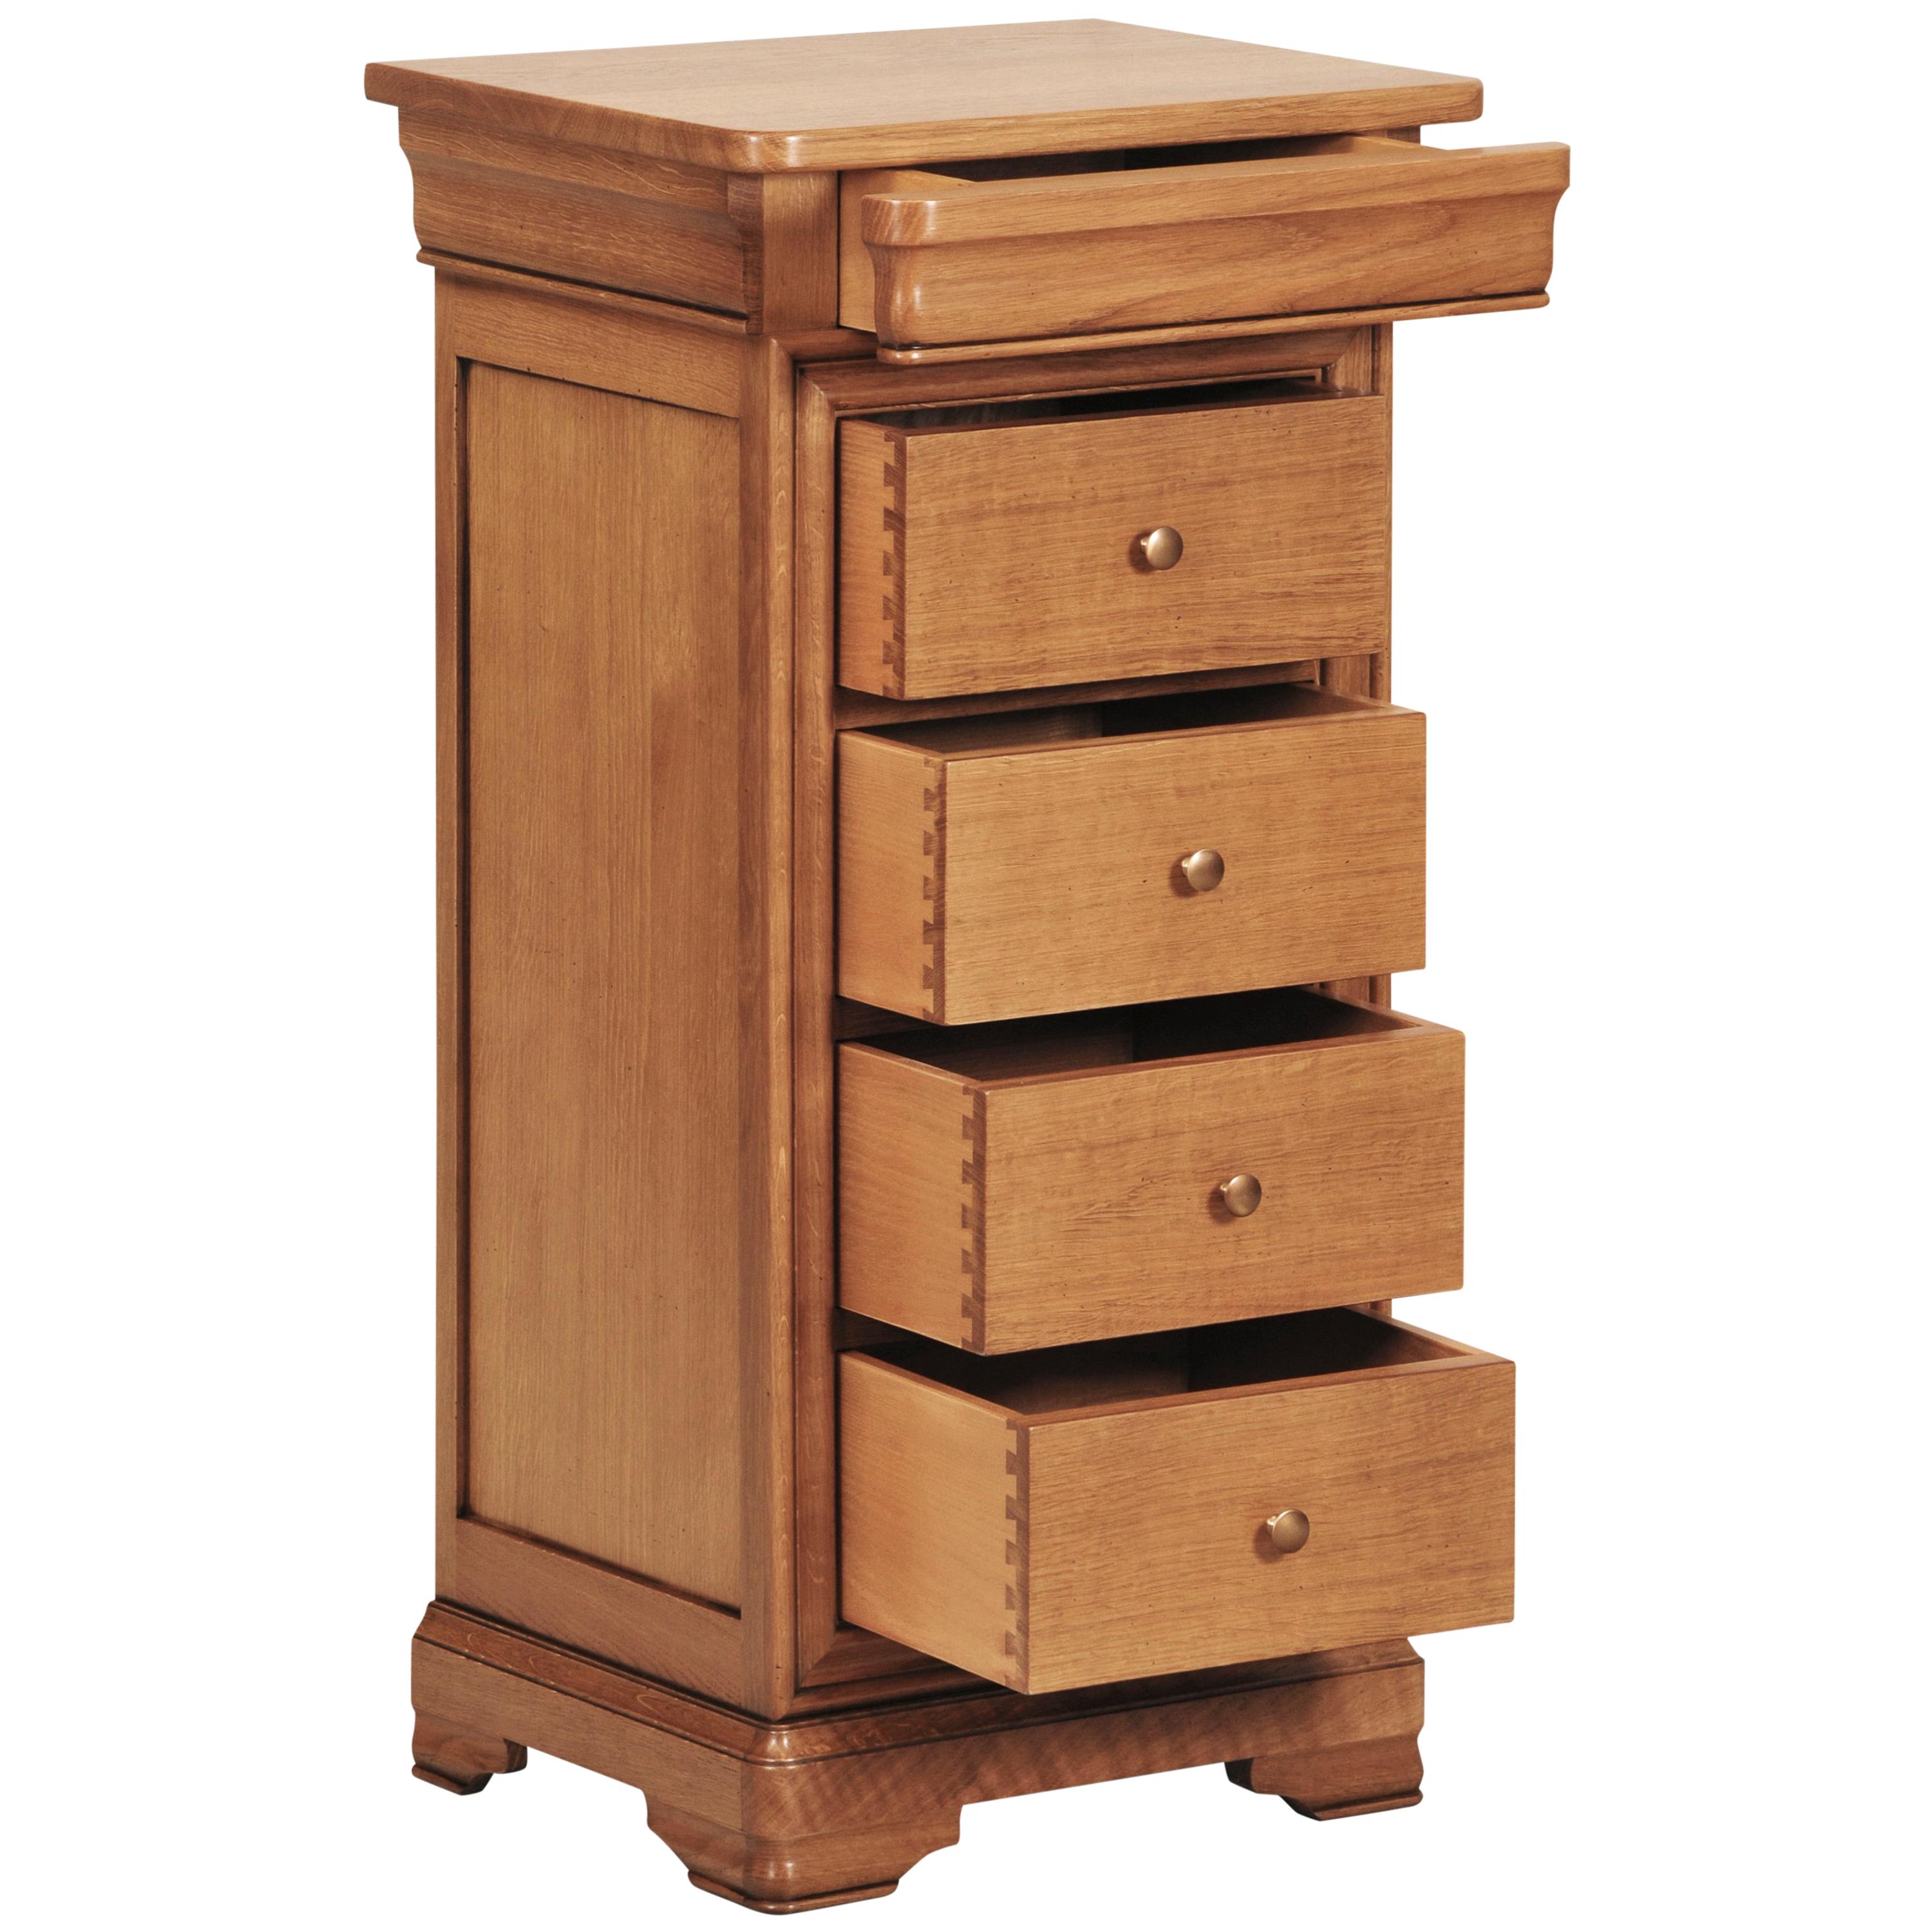 This chest of drawers is a handmade reproduction of the French Louis Philippe Style in the mid 19th century in France caracterized by its curved moldings, hand-curved feet and rounded design.

This chest is made of French oak sourced in